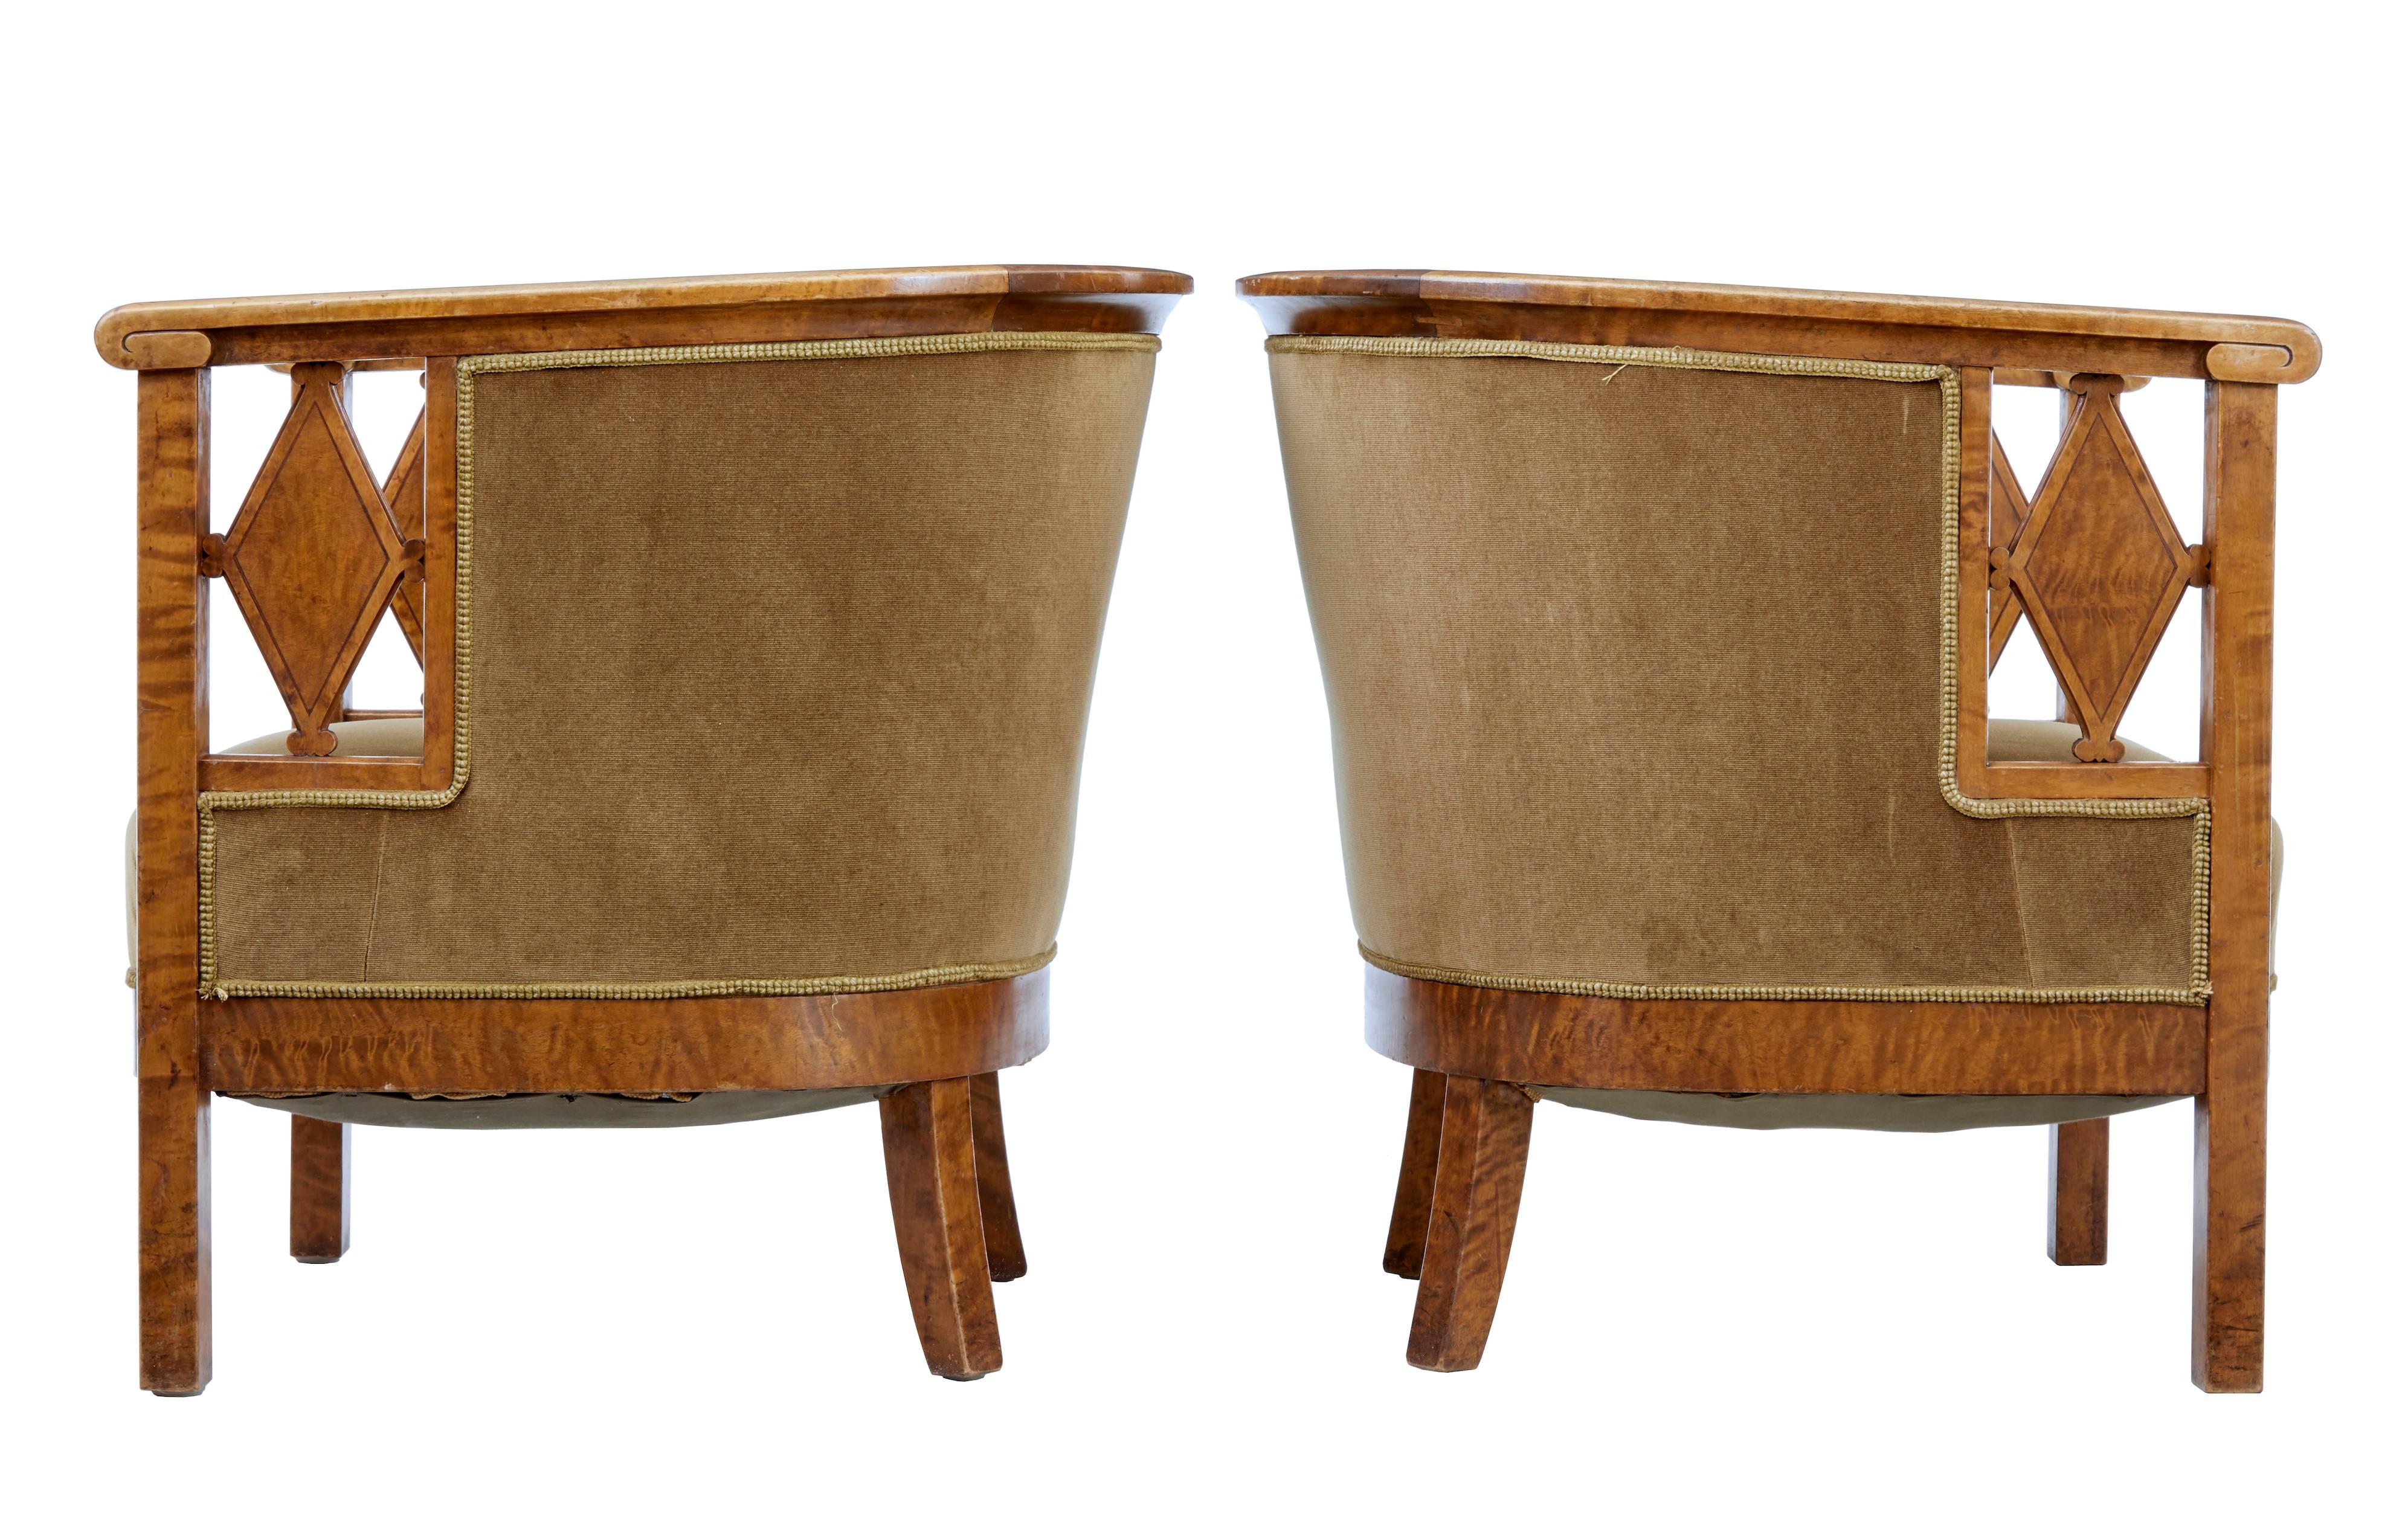 Fine quality pair of Swedish birch bergere armchairs, circa 1920.
Horseshoe shaped backs provide real club comfort.
Open sides with stylized diamond.
Covering with minor marks but in good usable condition.
Minor marks to woodwork.

Measures: